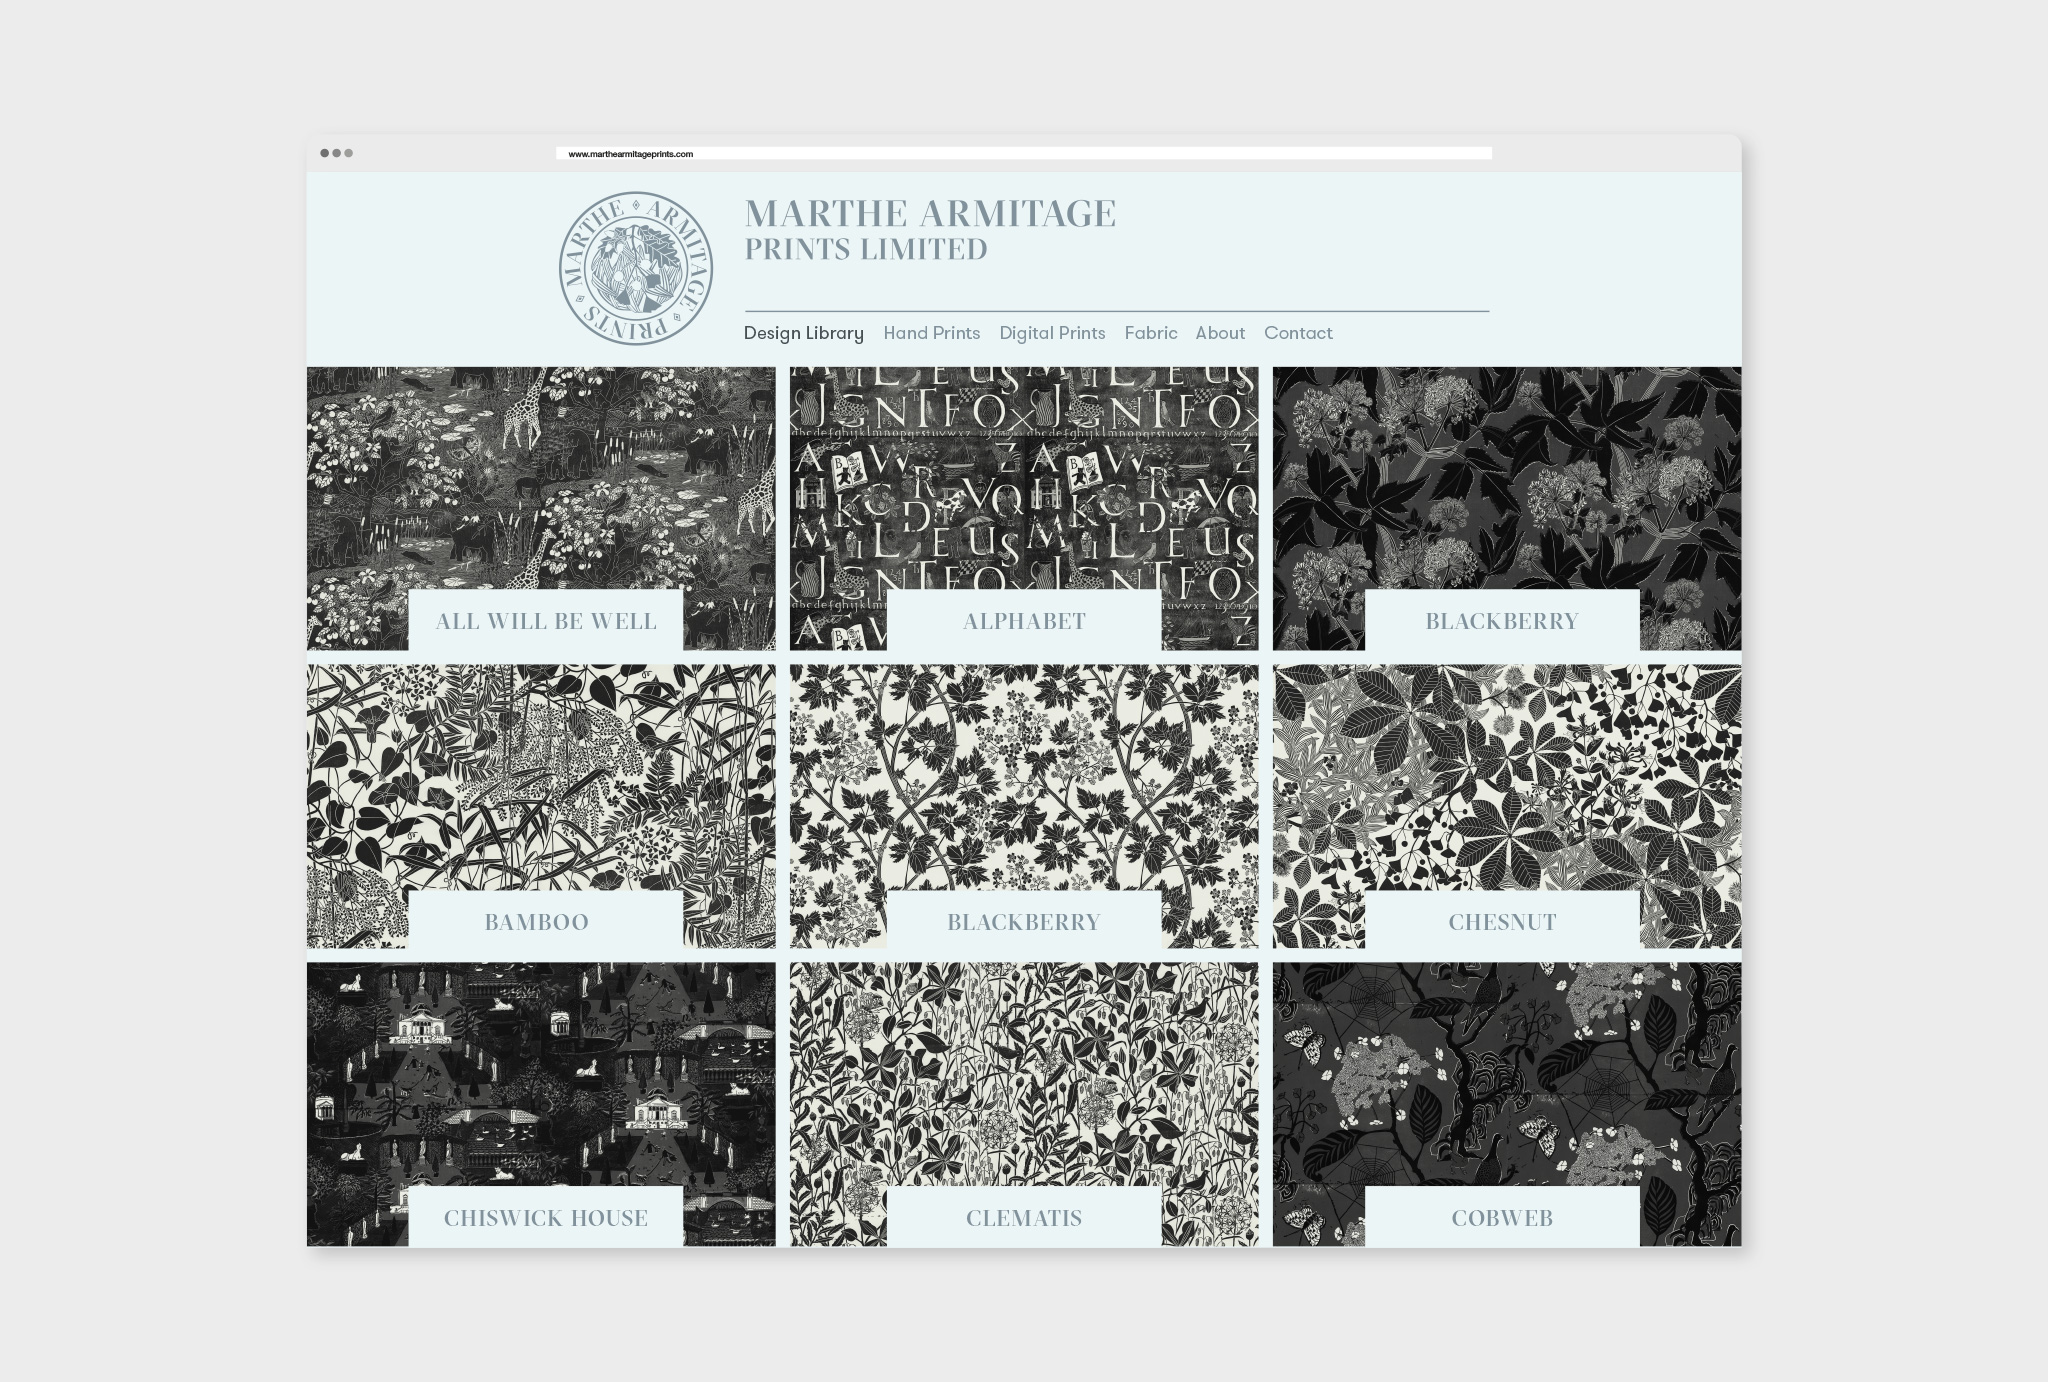 website design for library, nine different fabric designs in black